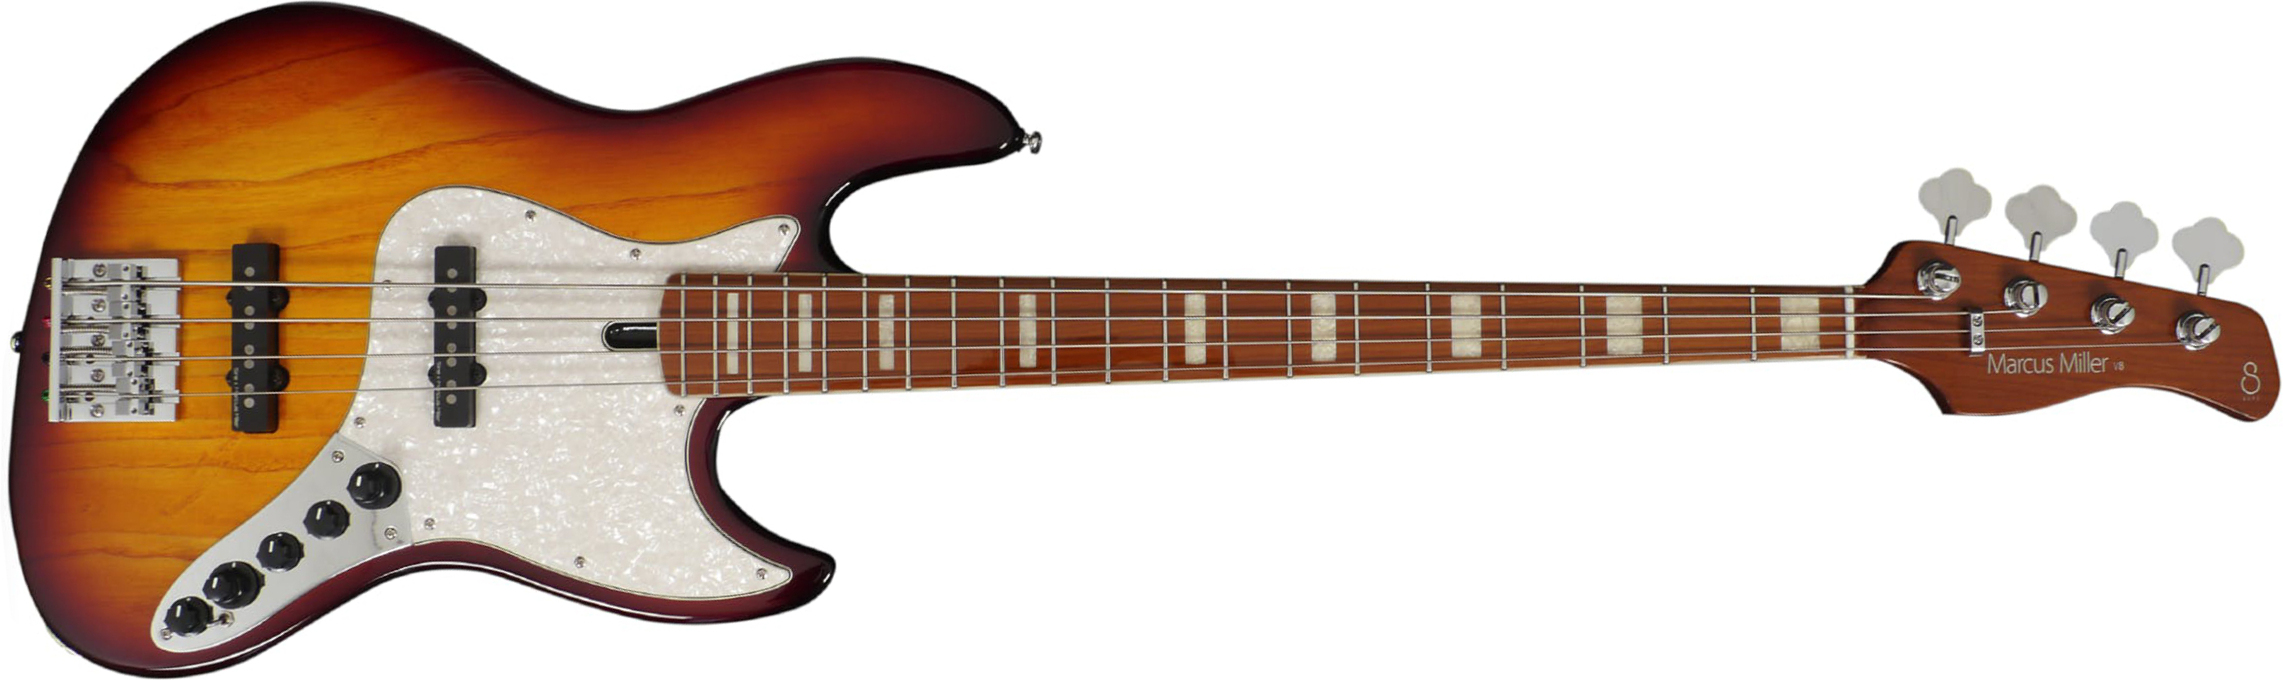 Marcus Miller V8 4st Active Mn - Tobacco Sunburst - Solid body electric bass - Main picture